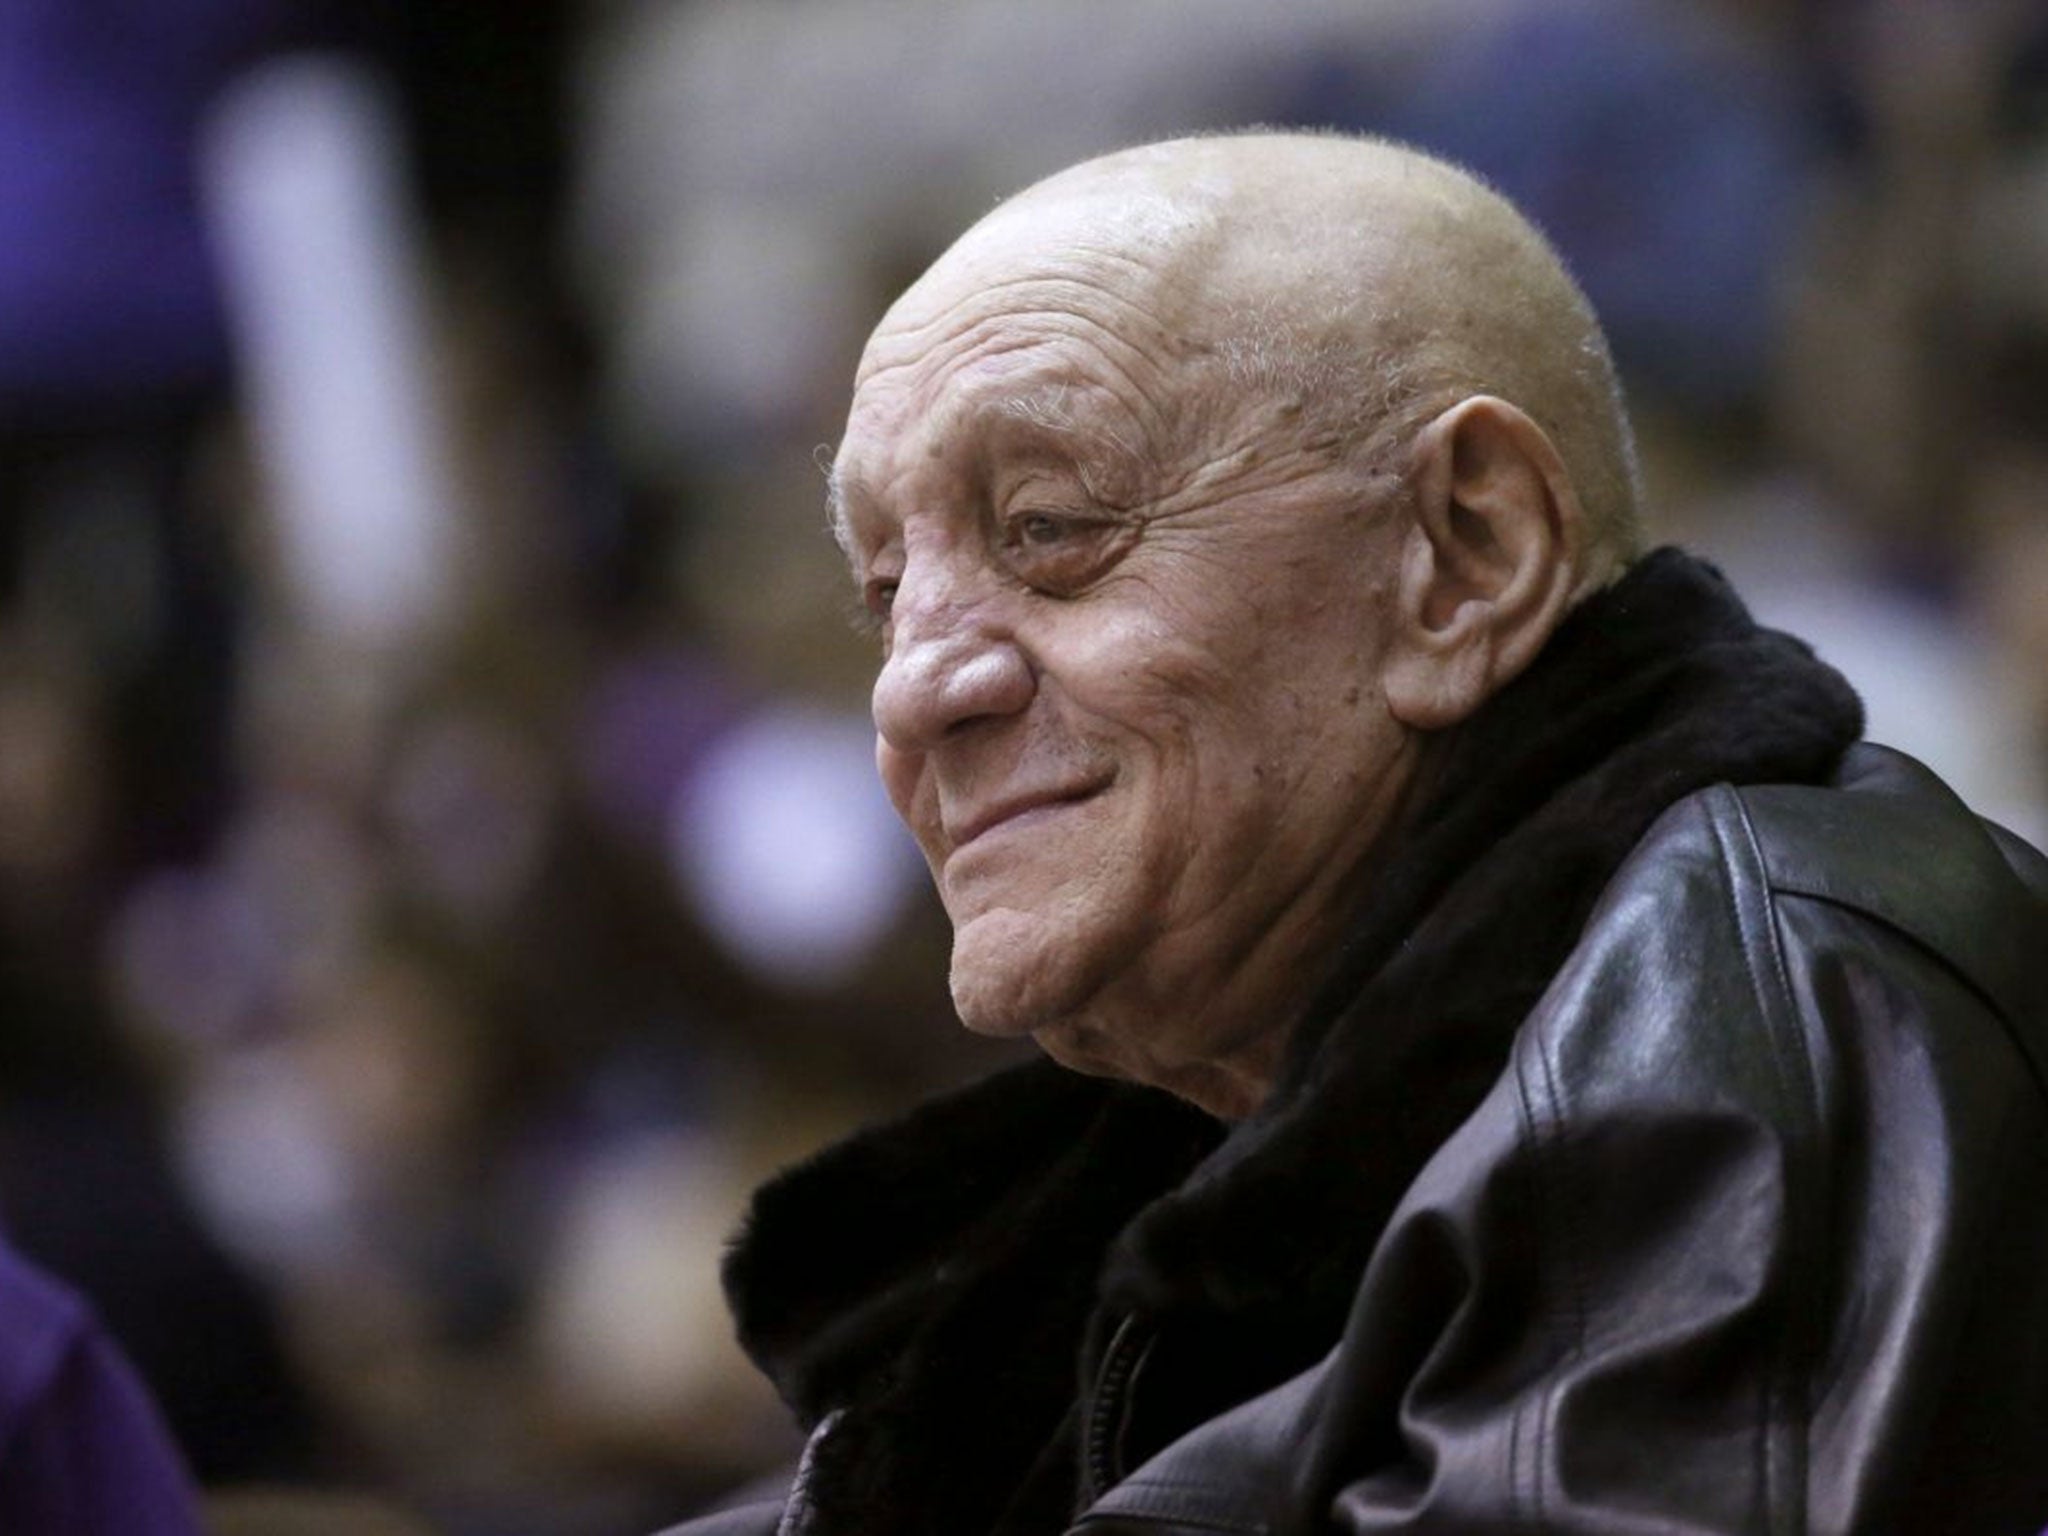 Jerry Tarkanian watches his granddaughter Dannielle Diamant playing basketball